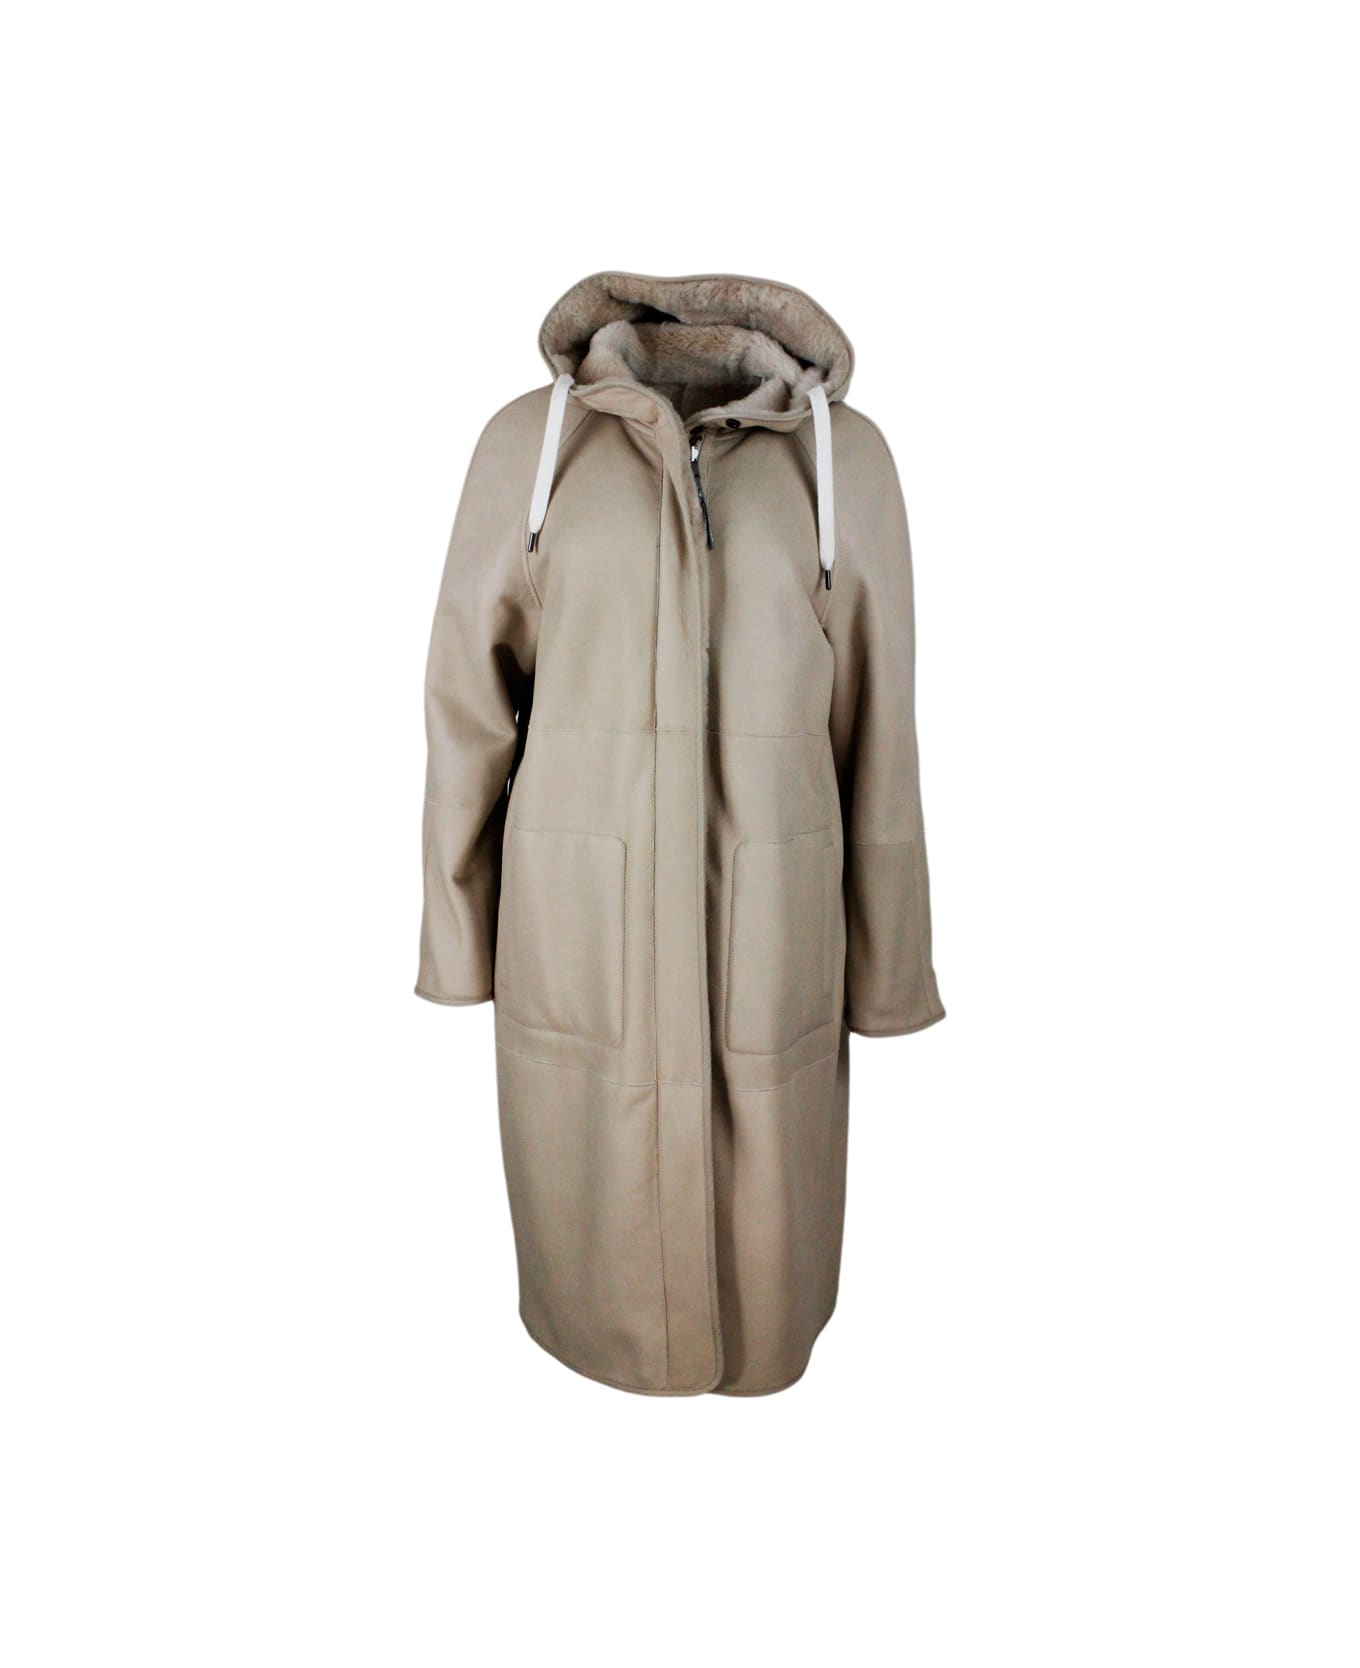 Brunello Cucinelli Reversible Coat In Soft Shearling With Hood - Beige